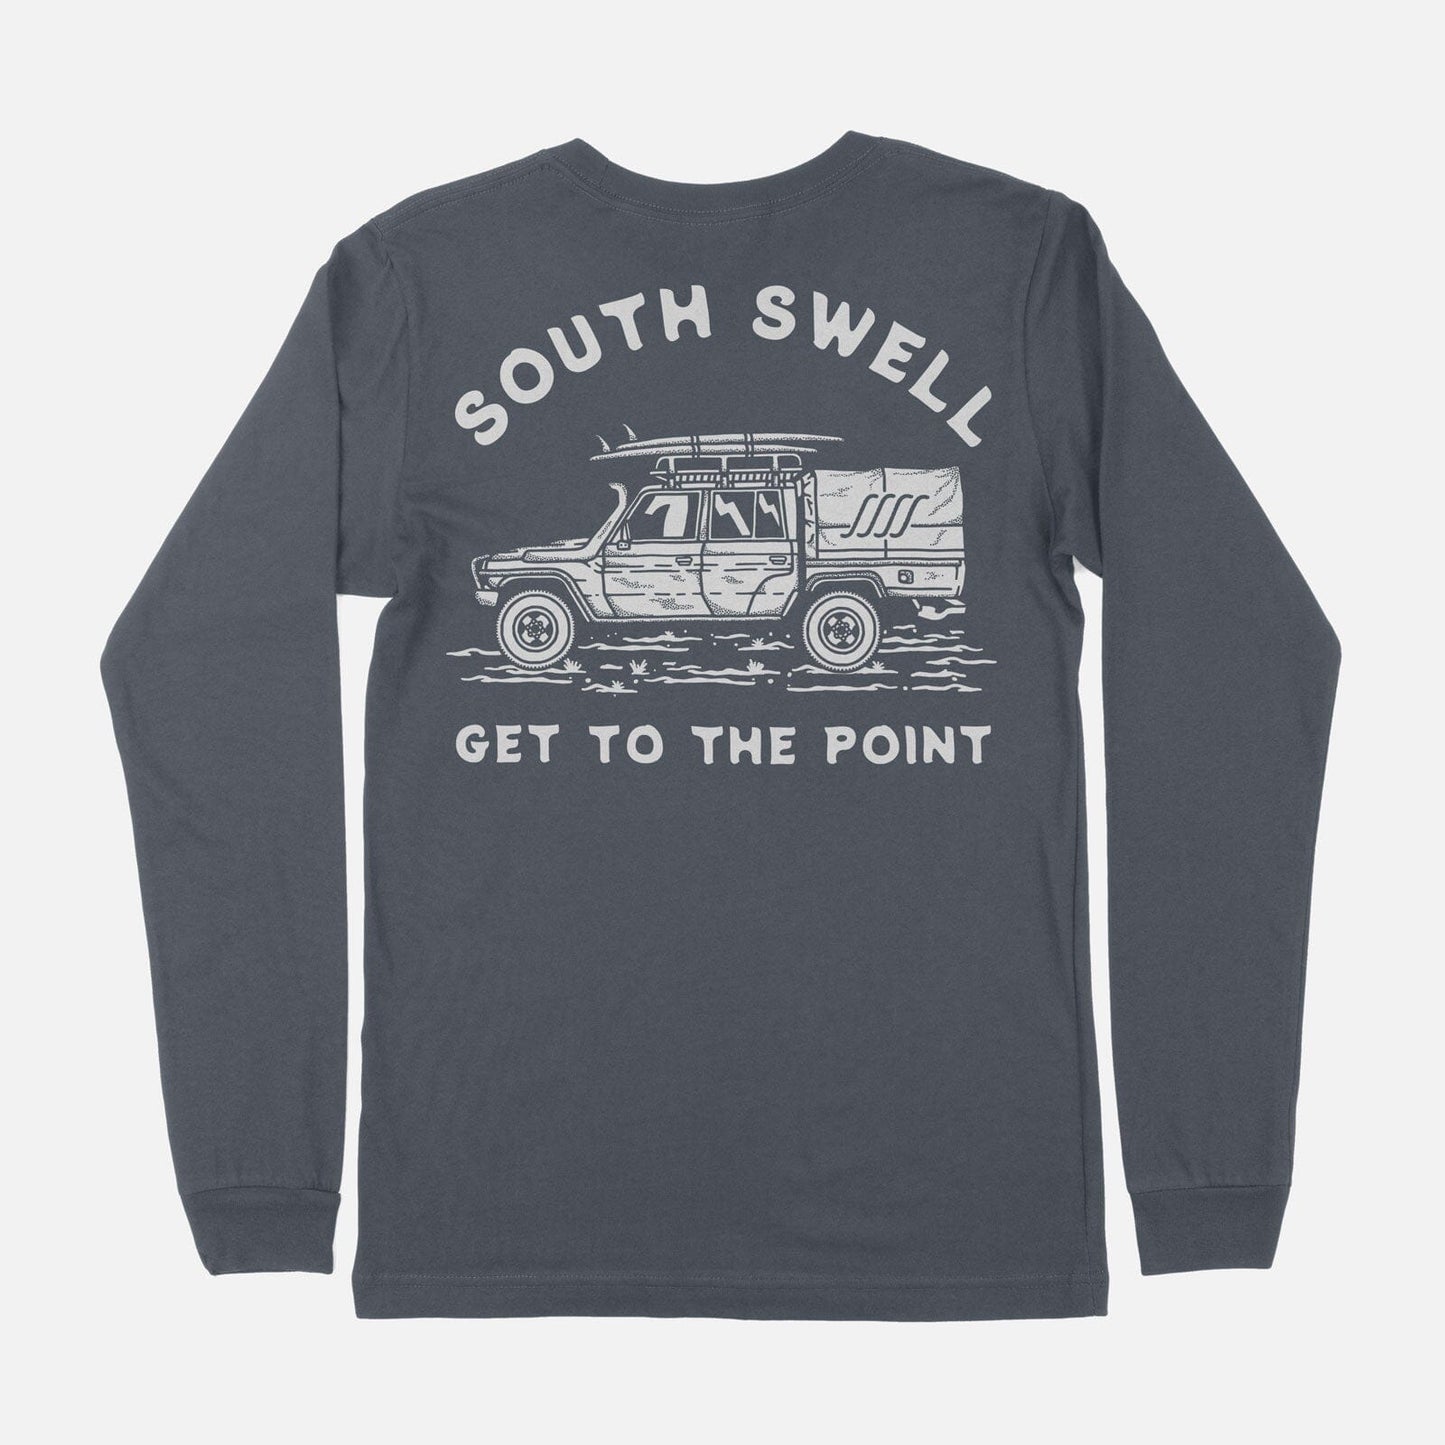 South Swell Get To The Point Longsleeve M Longsleeve Tee SOUTH SWELL S Vintage Navy 